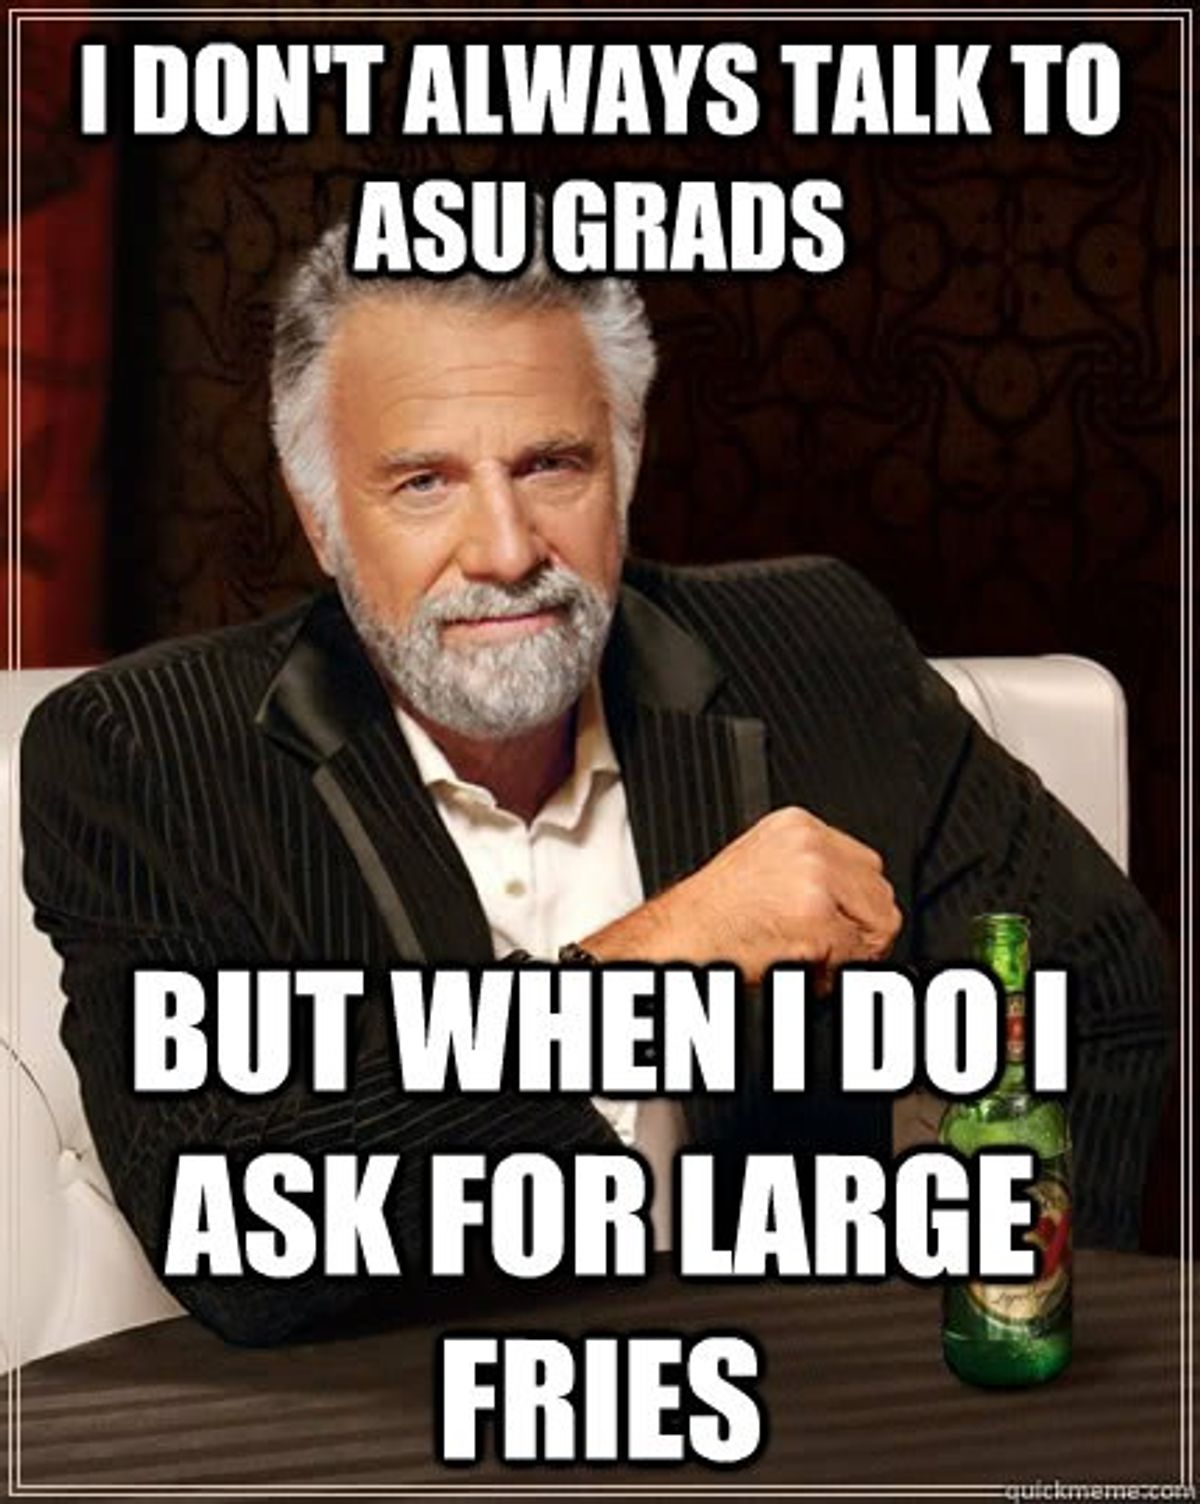 68 Things I Would Rather Do Than Go To ASU